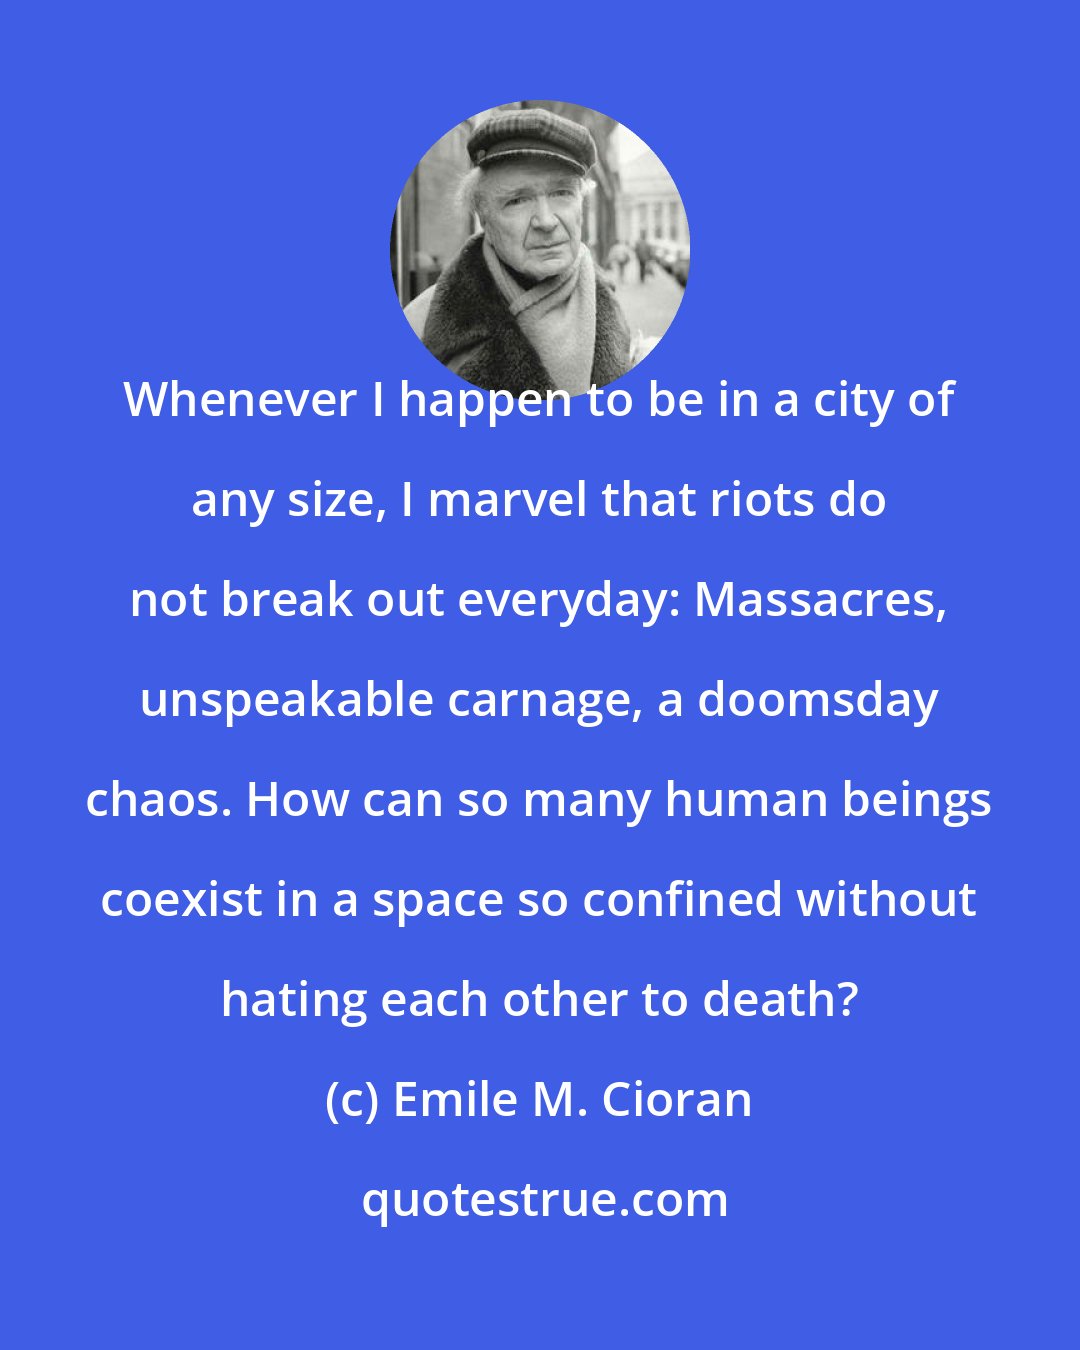 Emile M. Cioran: Whenever I happen to be in a city of any size, I marvel that riots do not break out everyday: Massacres, unspeakable carnage, a doomsday chaos. How can so many human beings coexist in a space so confined without hating each other to death?